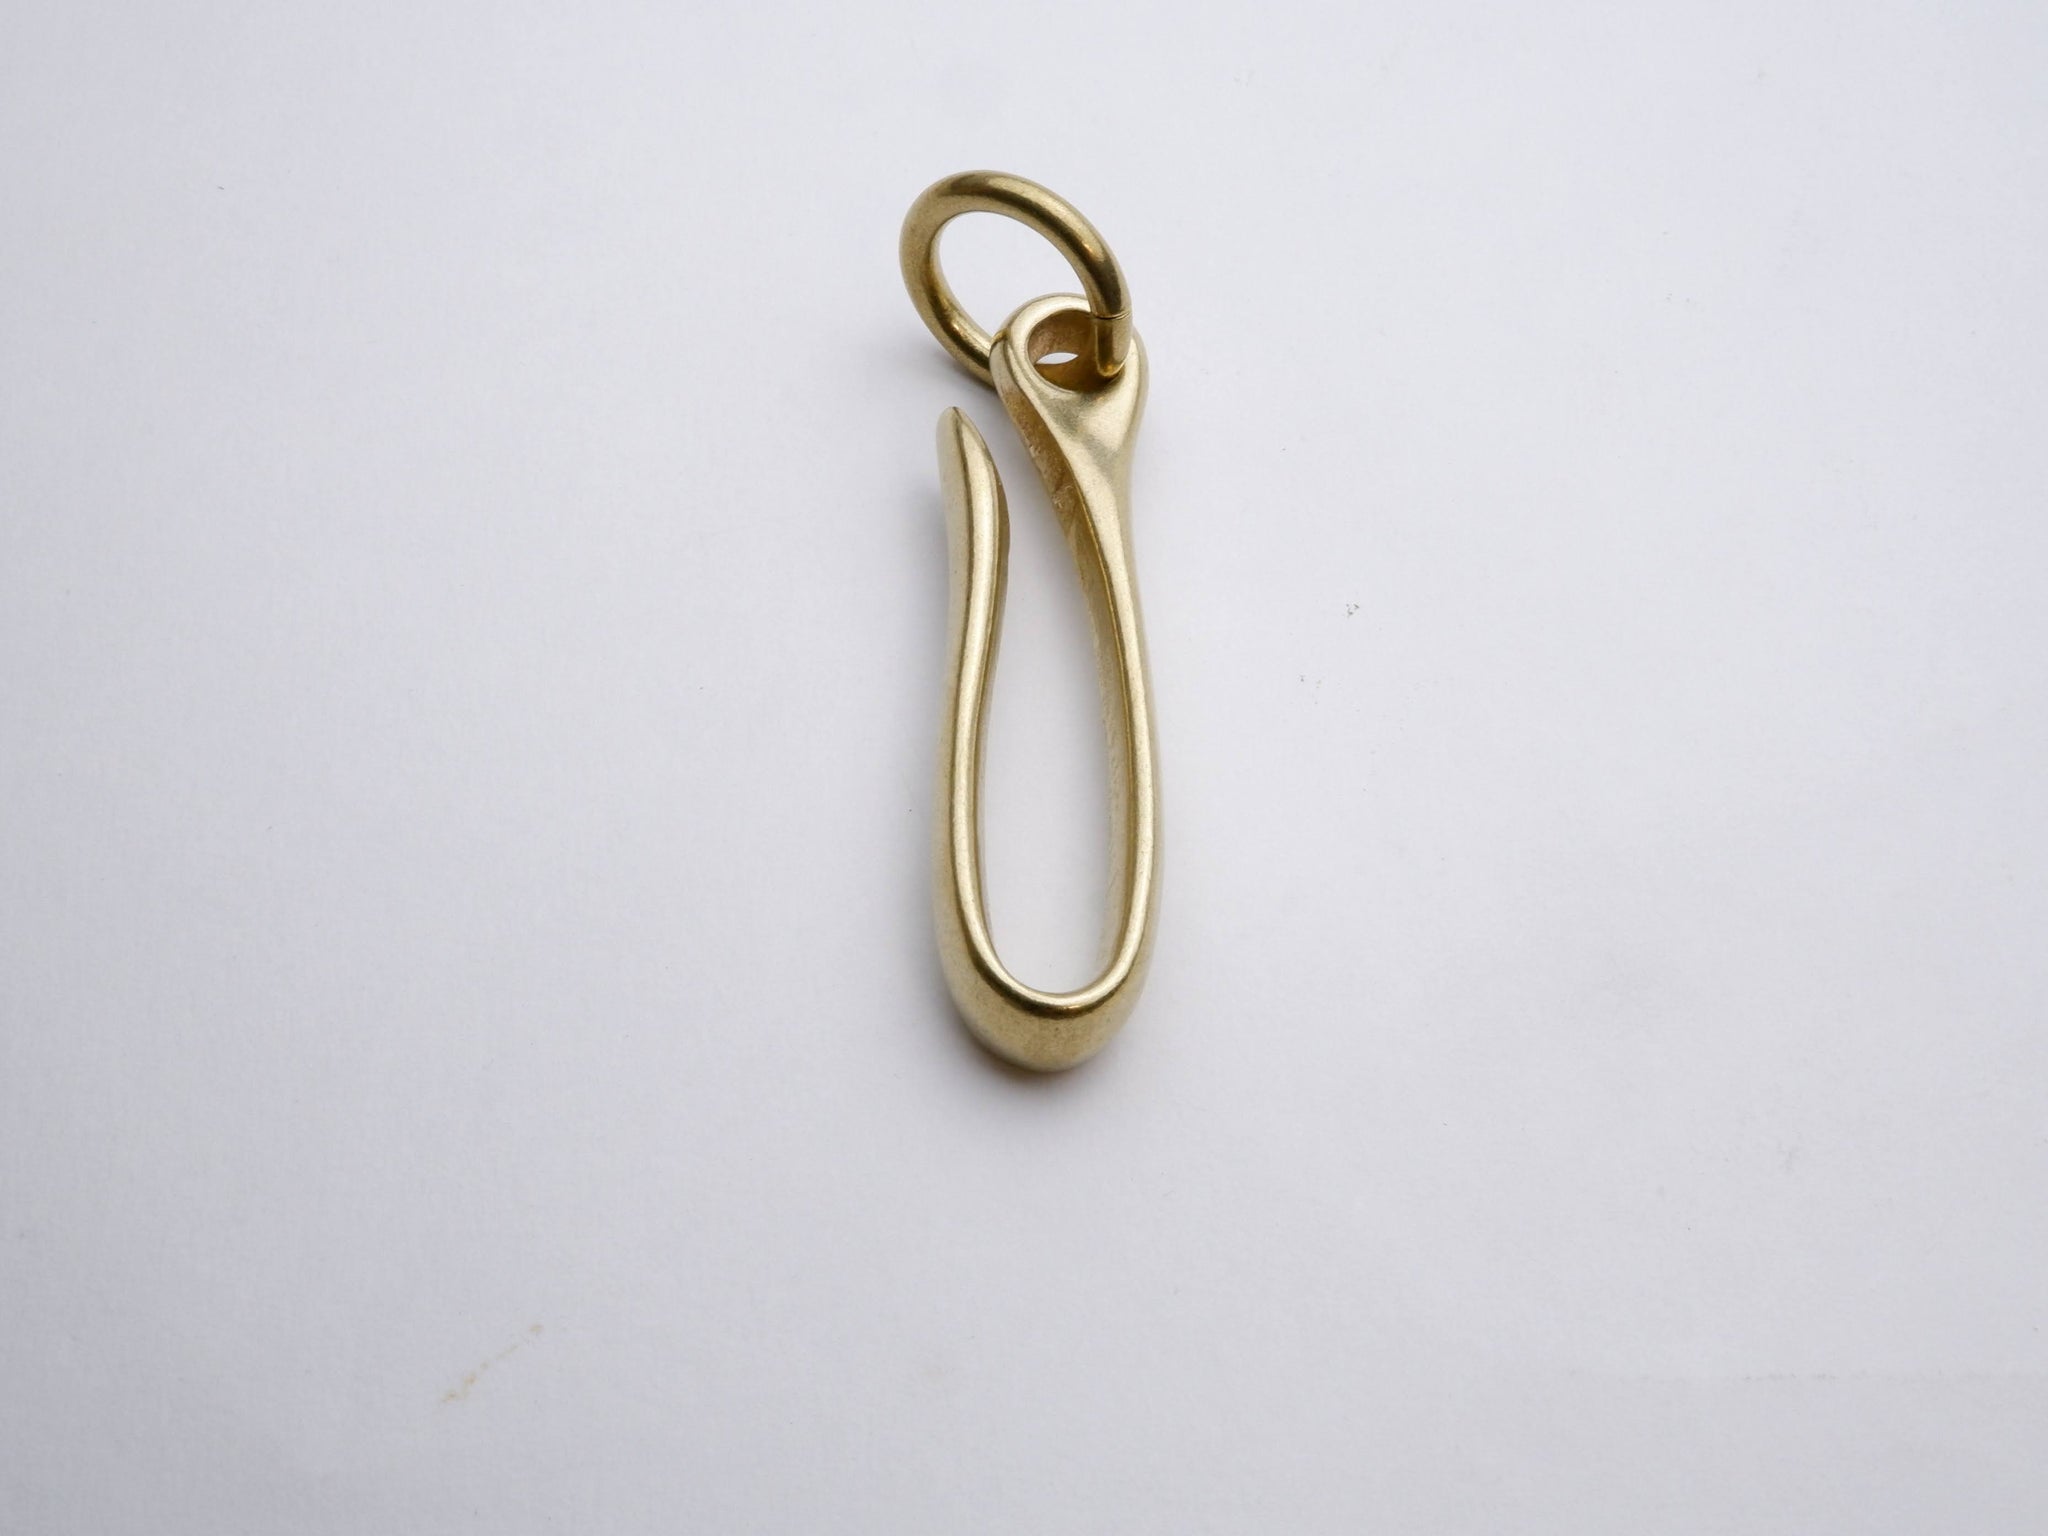 Spring Mount Loop Brass Japanese Fish Hook Keychain With Horween